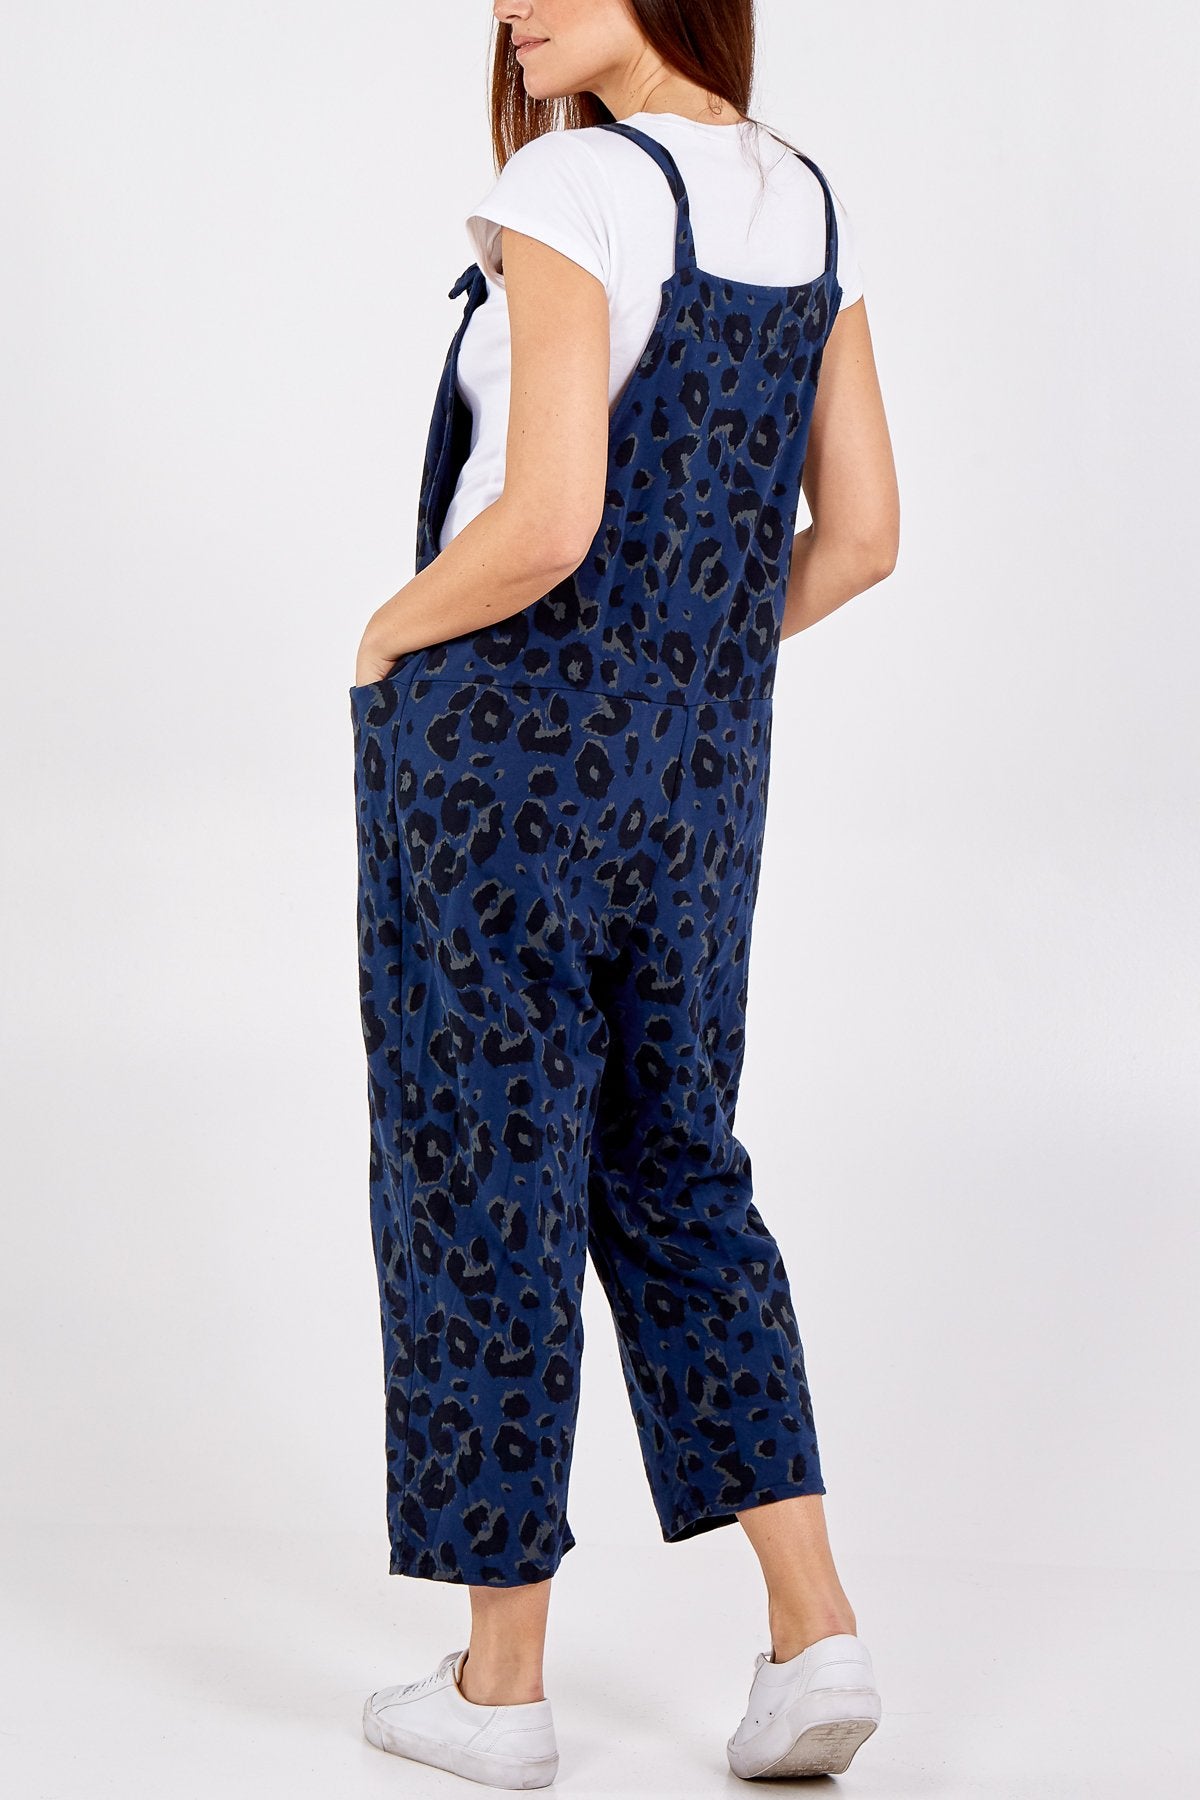 Navy Blue Leopard Tie Cropped Dungarees